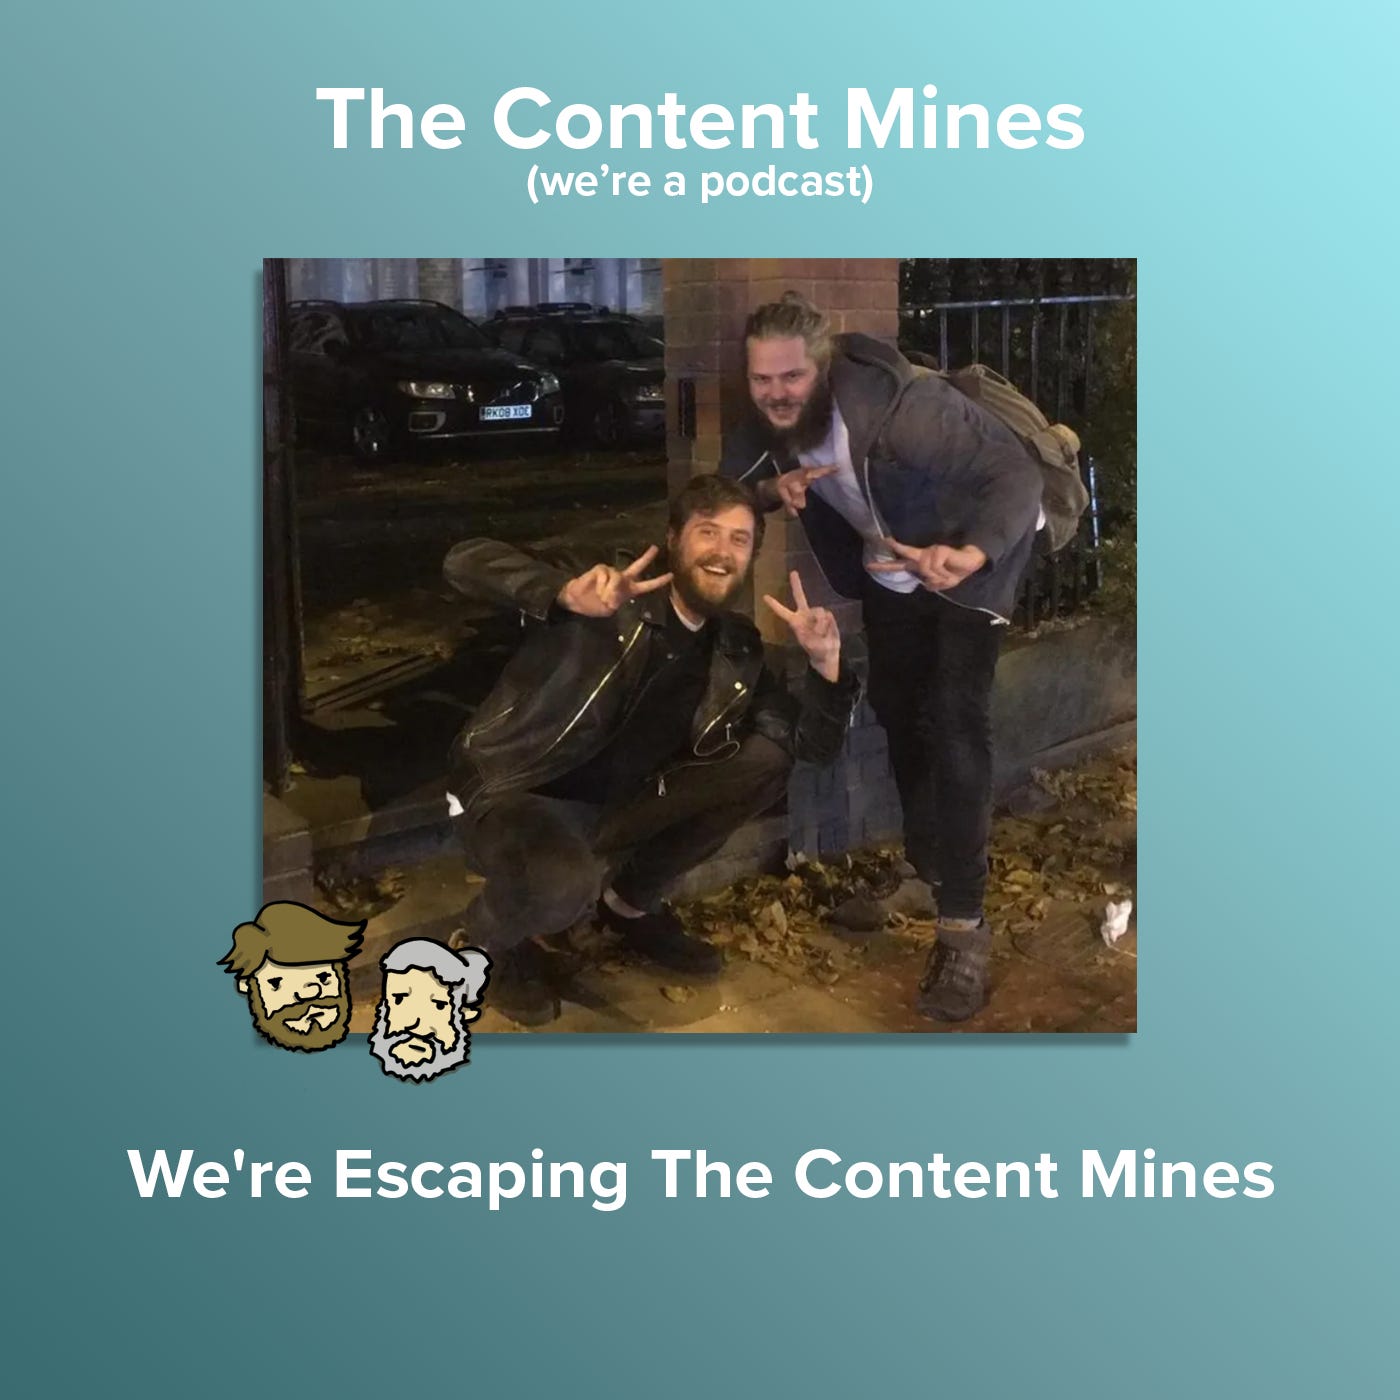 We’re Escaping The Content Mines